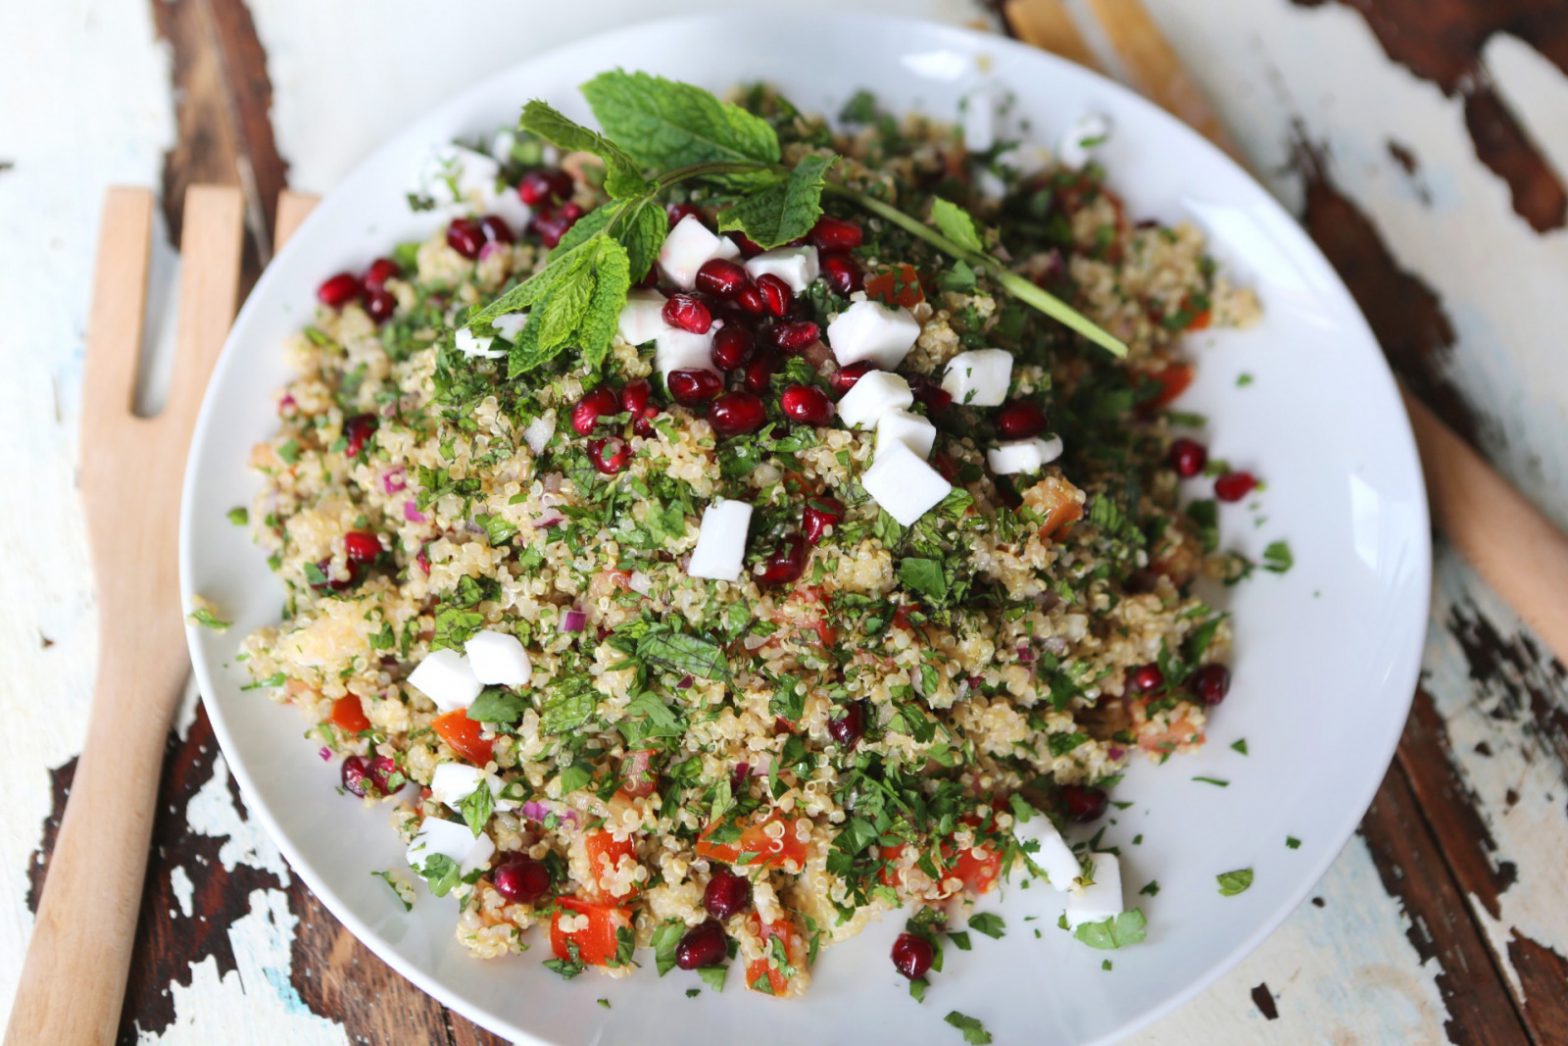 Herby Quinoa Salad with Pomegranate and 'Feta'